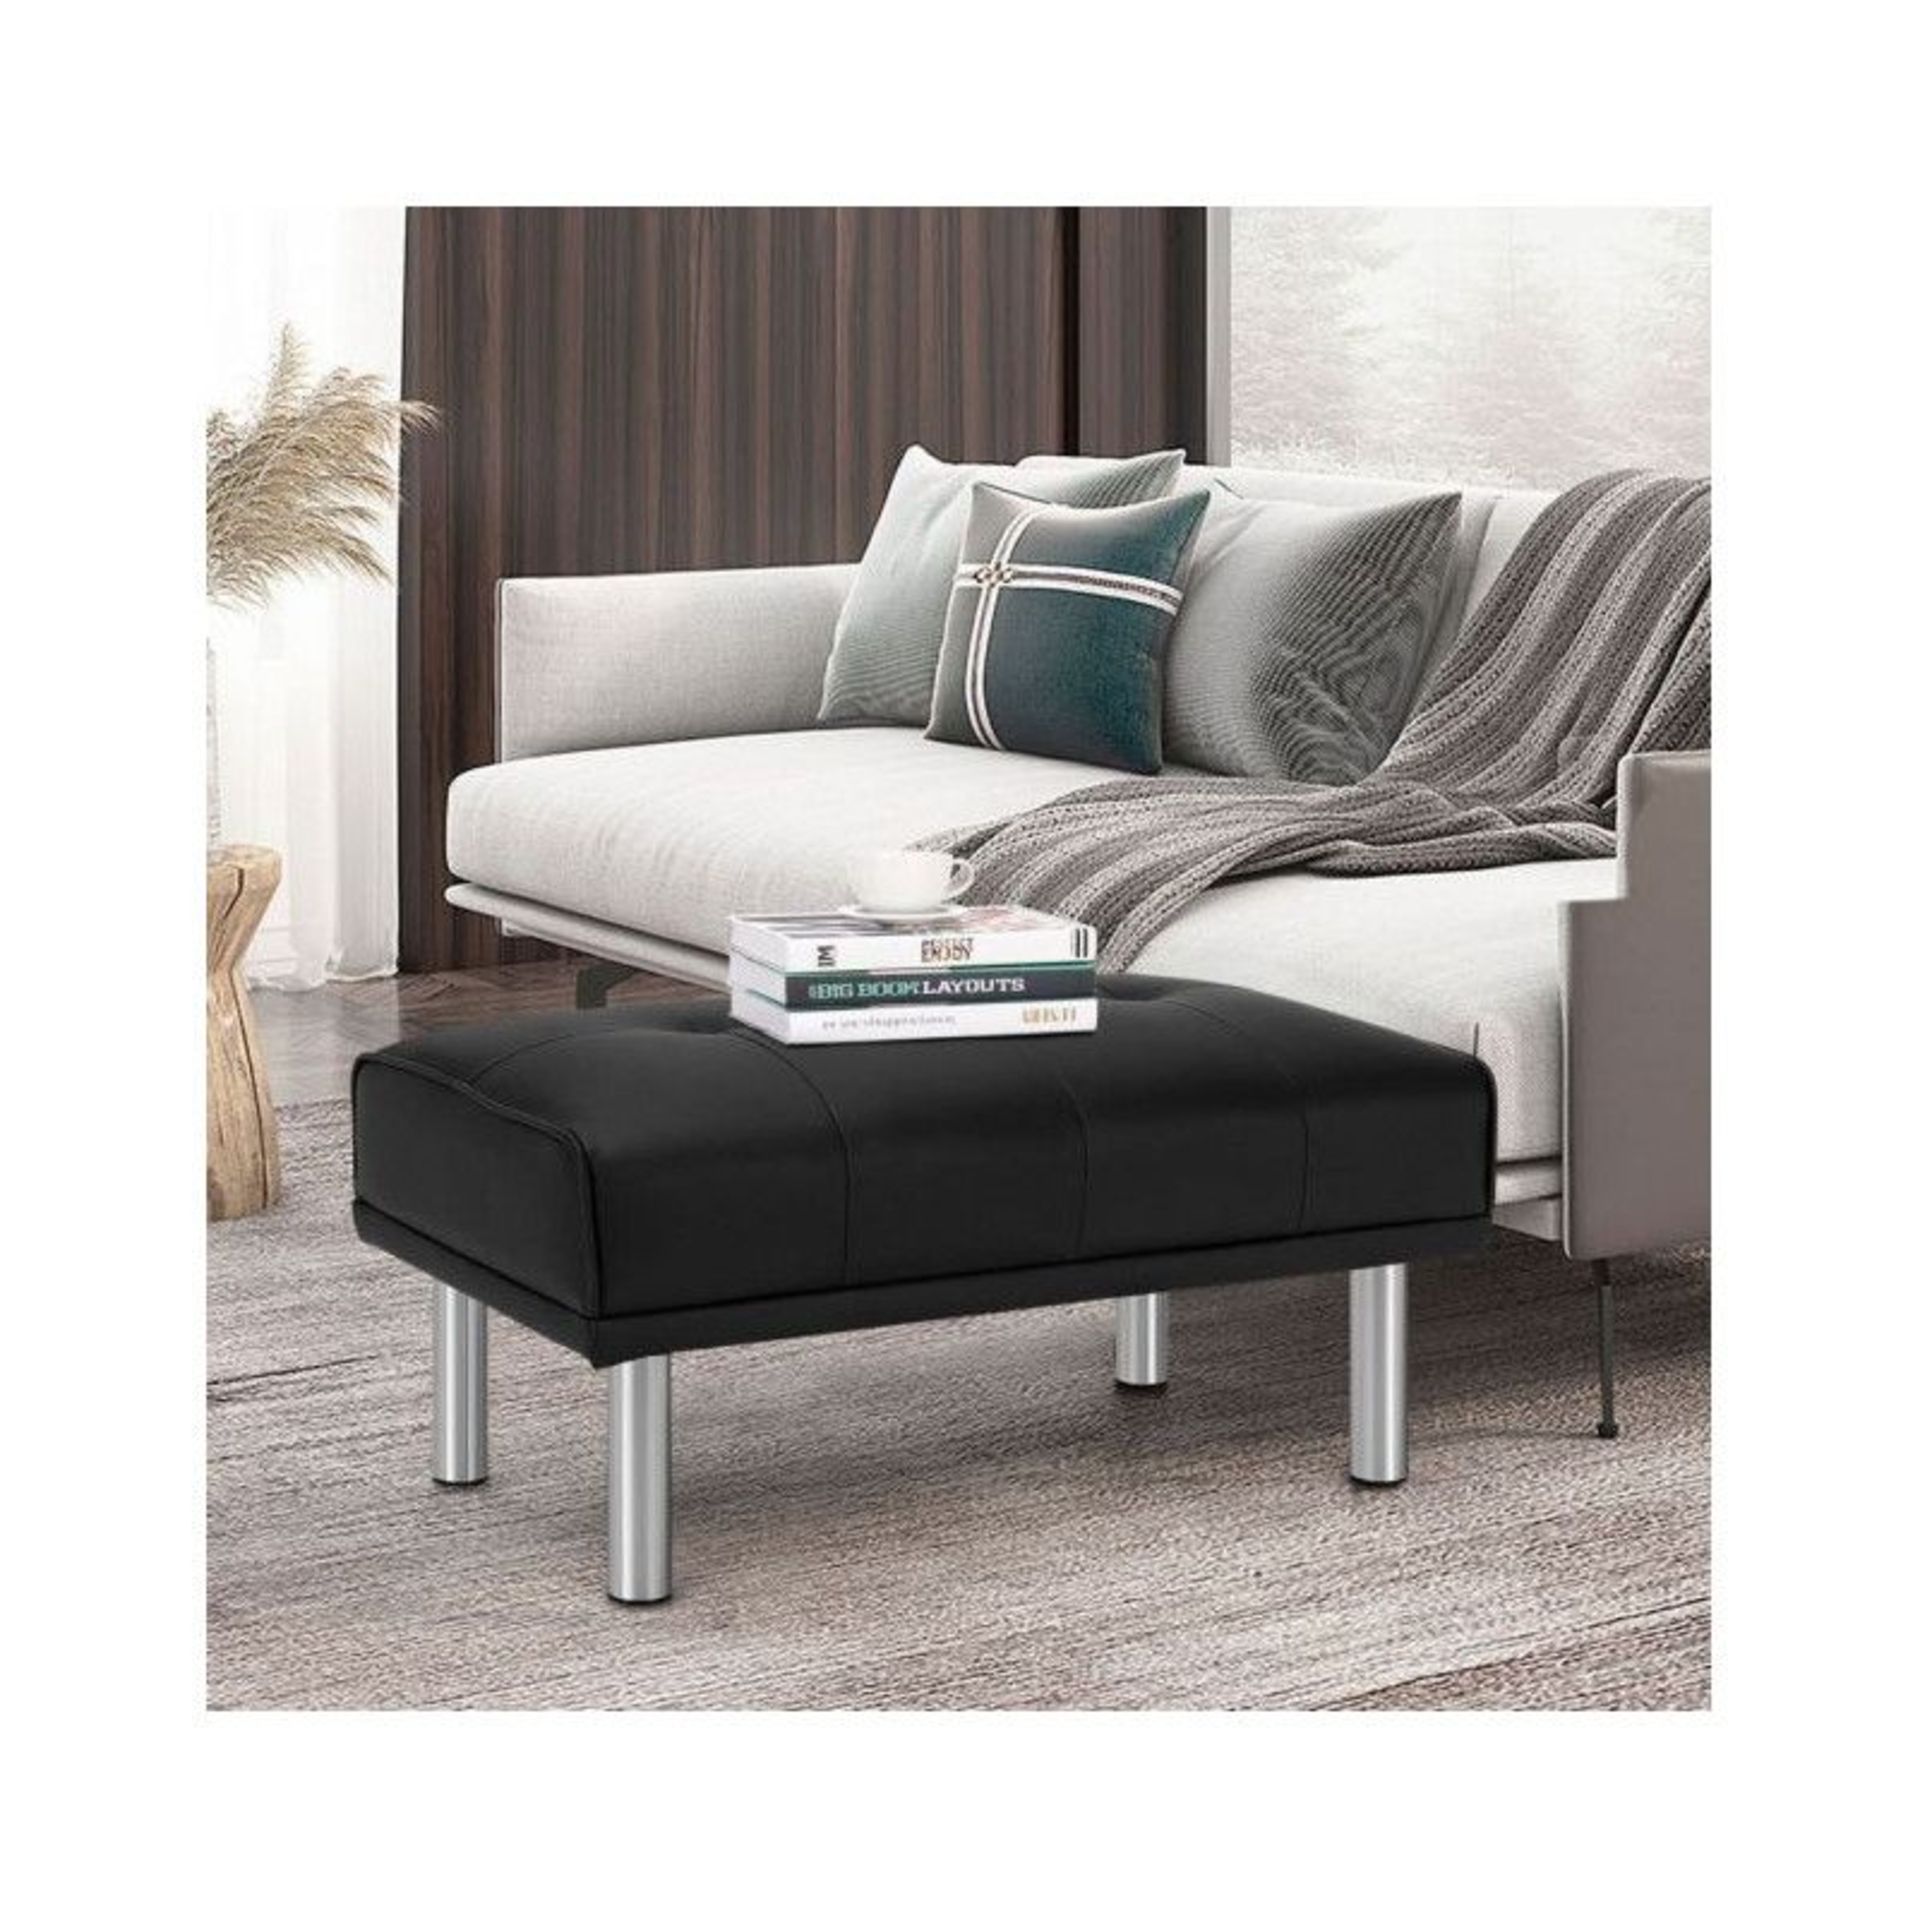 LEATHER TUFTED UPHOLSTERED OTTOMAN BENCH FOR LIVING ROOM ENTRYWAY. - ER53.